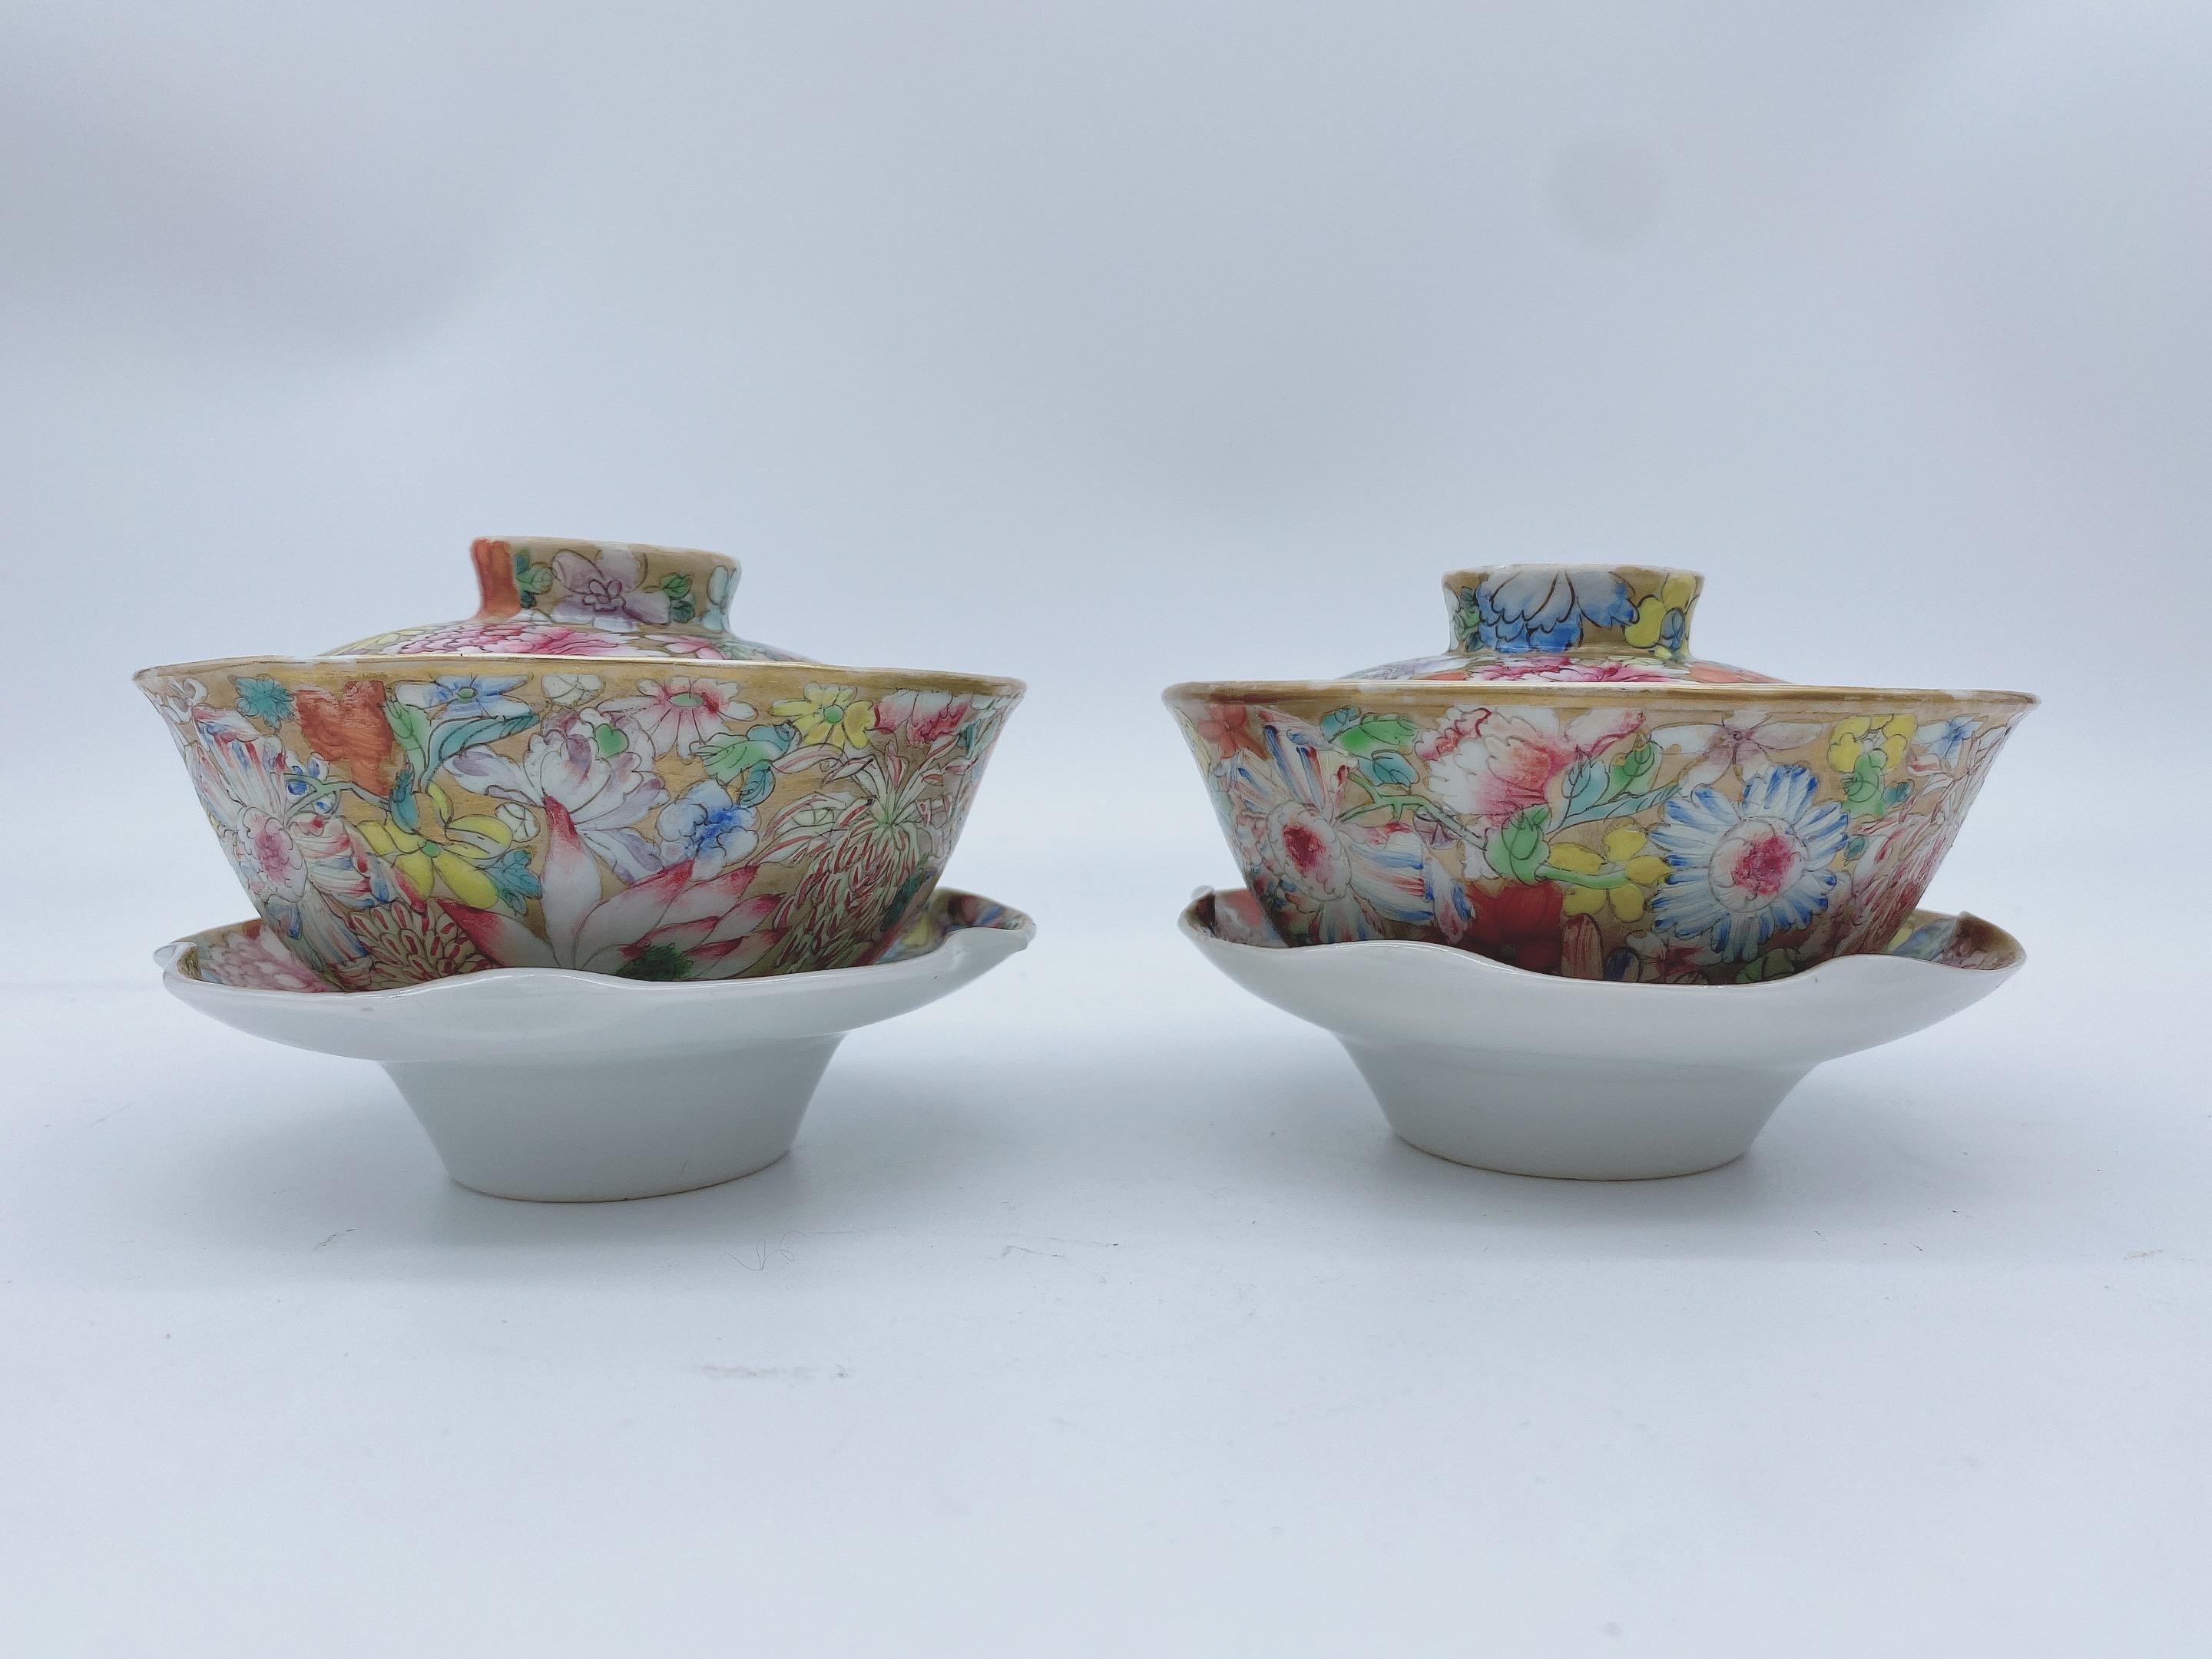 Pair of 19th Century Chinese Flower-Blossom Porcelain Cups with Cover and Base For Sale 7